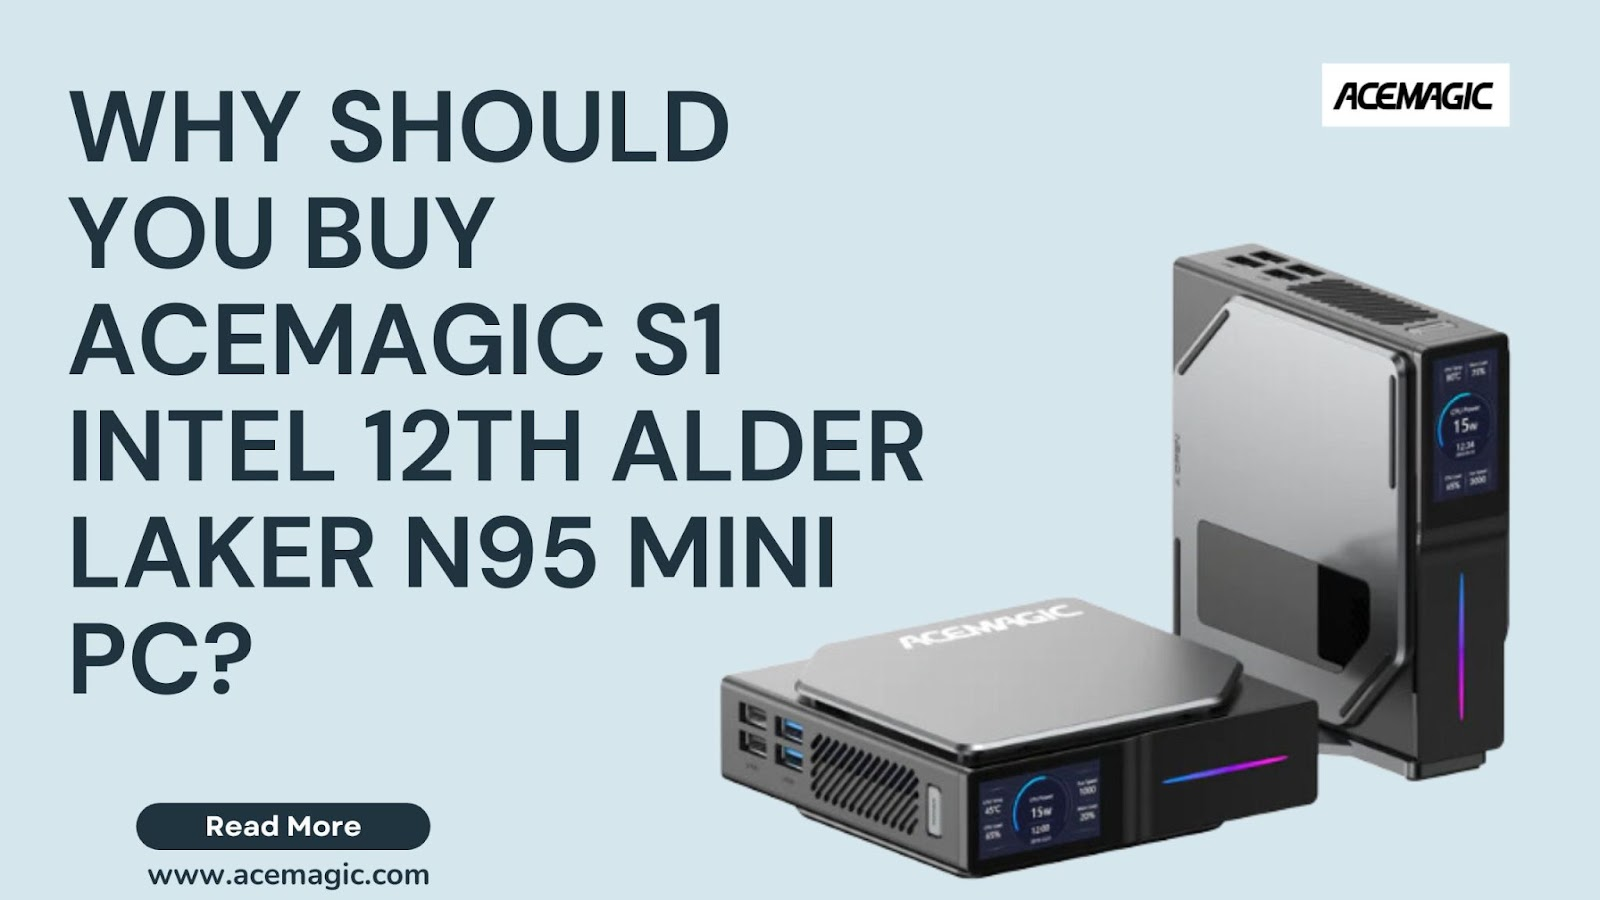 Why Should You Buy ACEMAGIC S1 Intel 12th Alder Laker N95 Mini PC